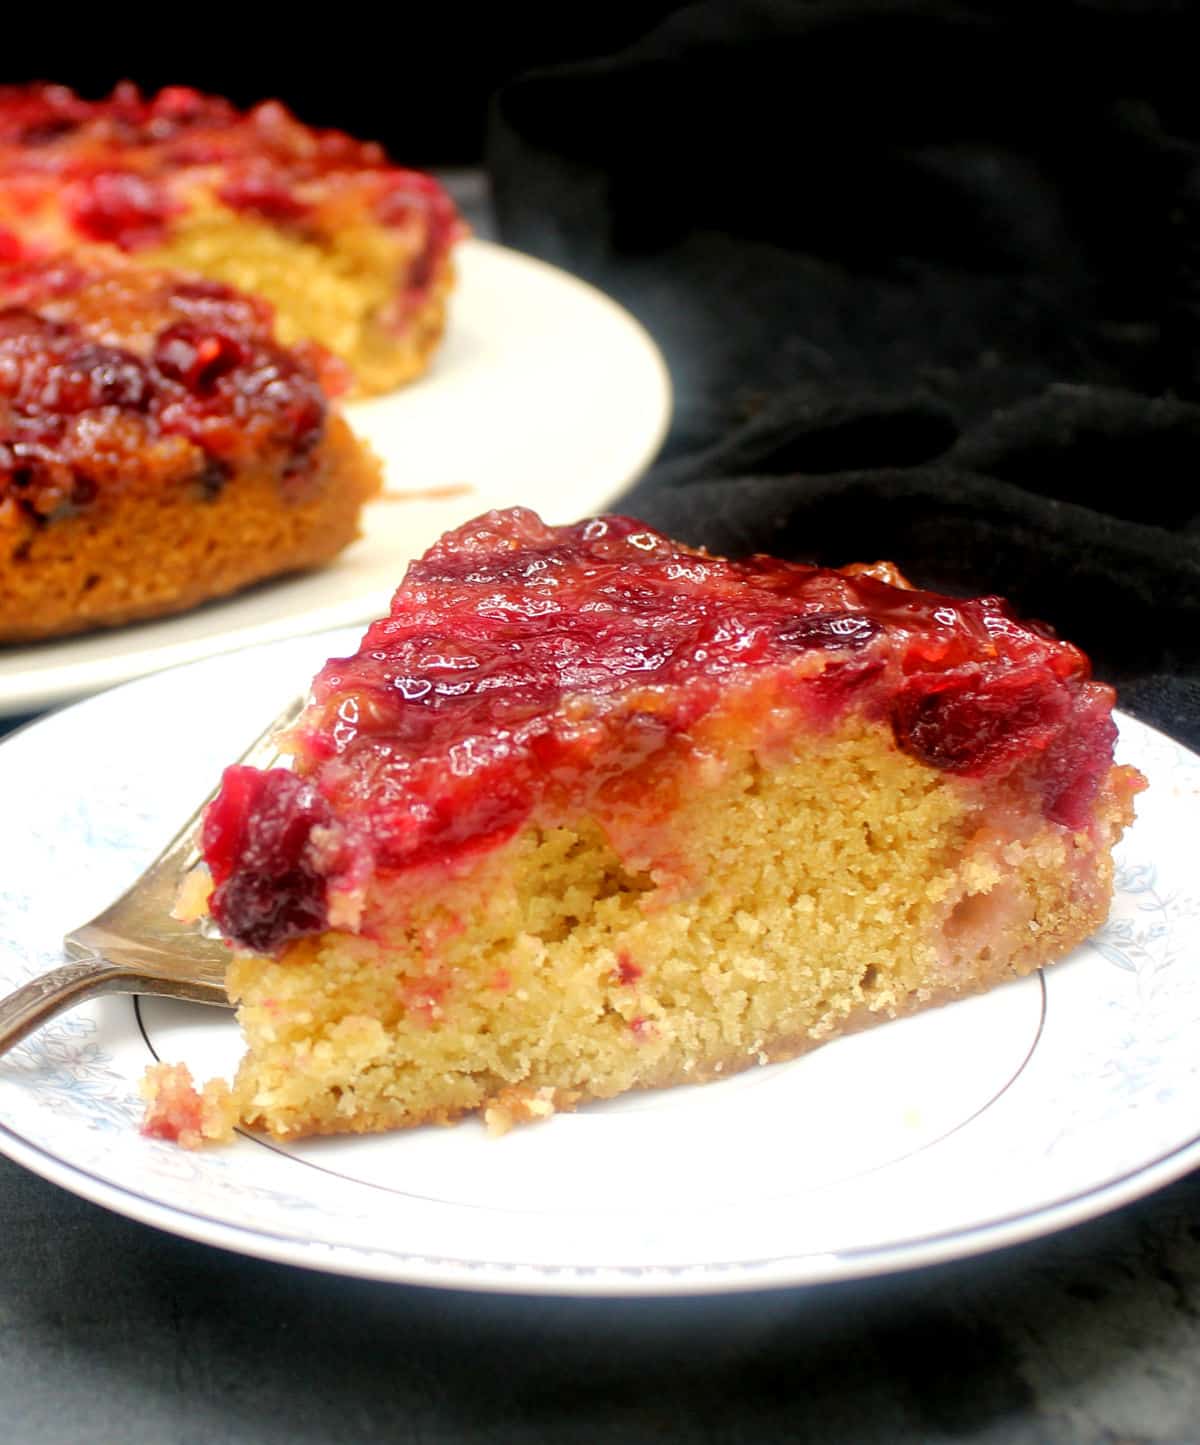 Slice of vegan cranberry upside down cake in white plate with fork.